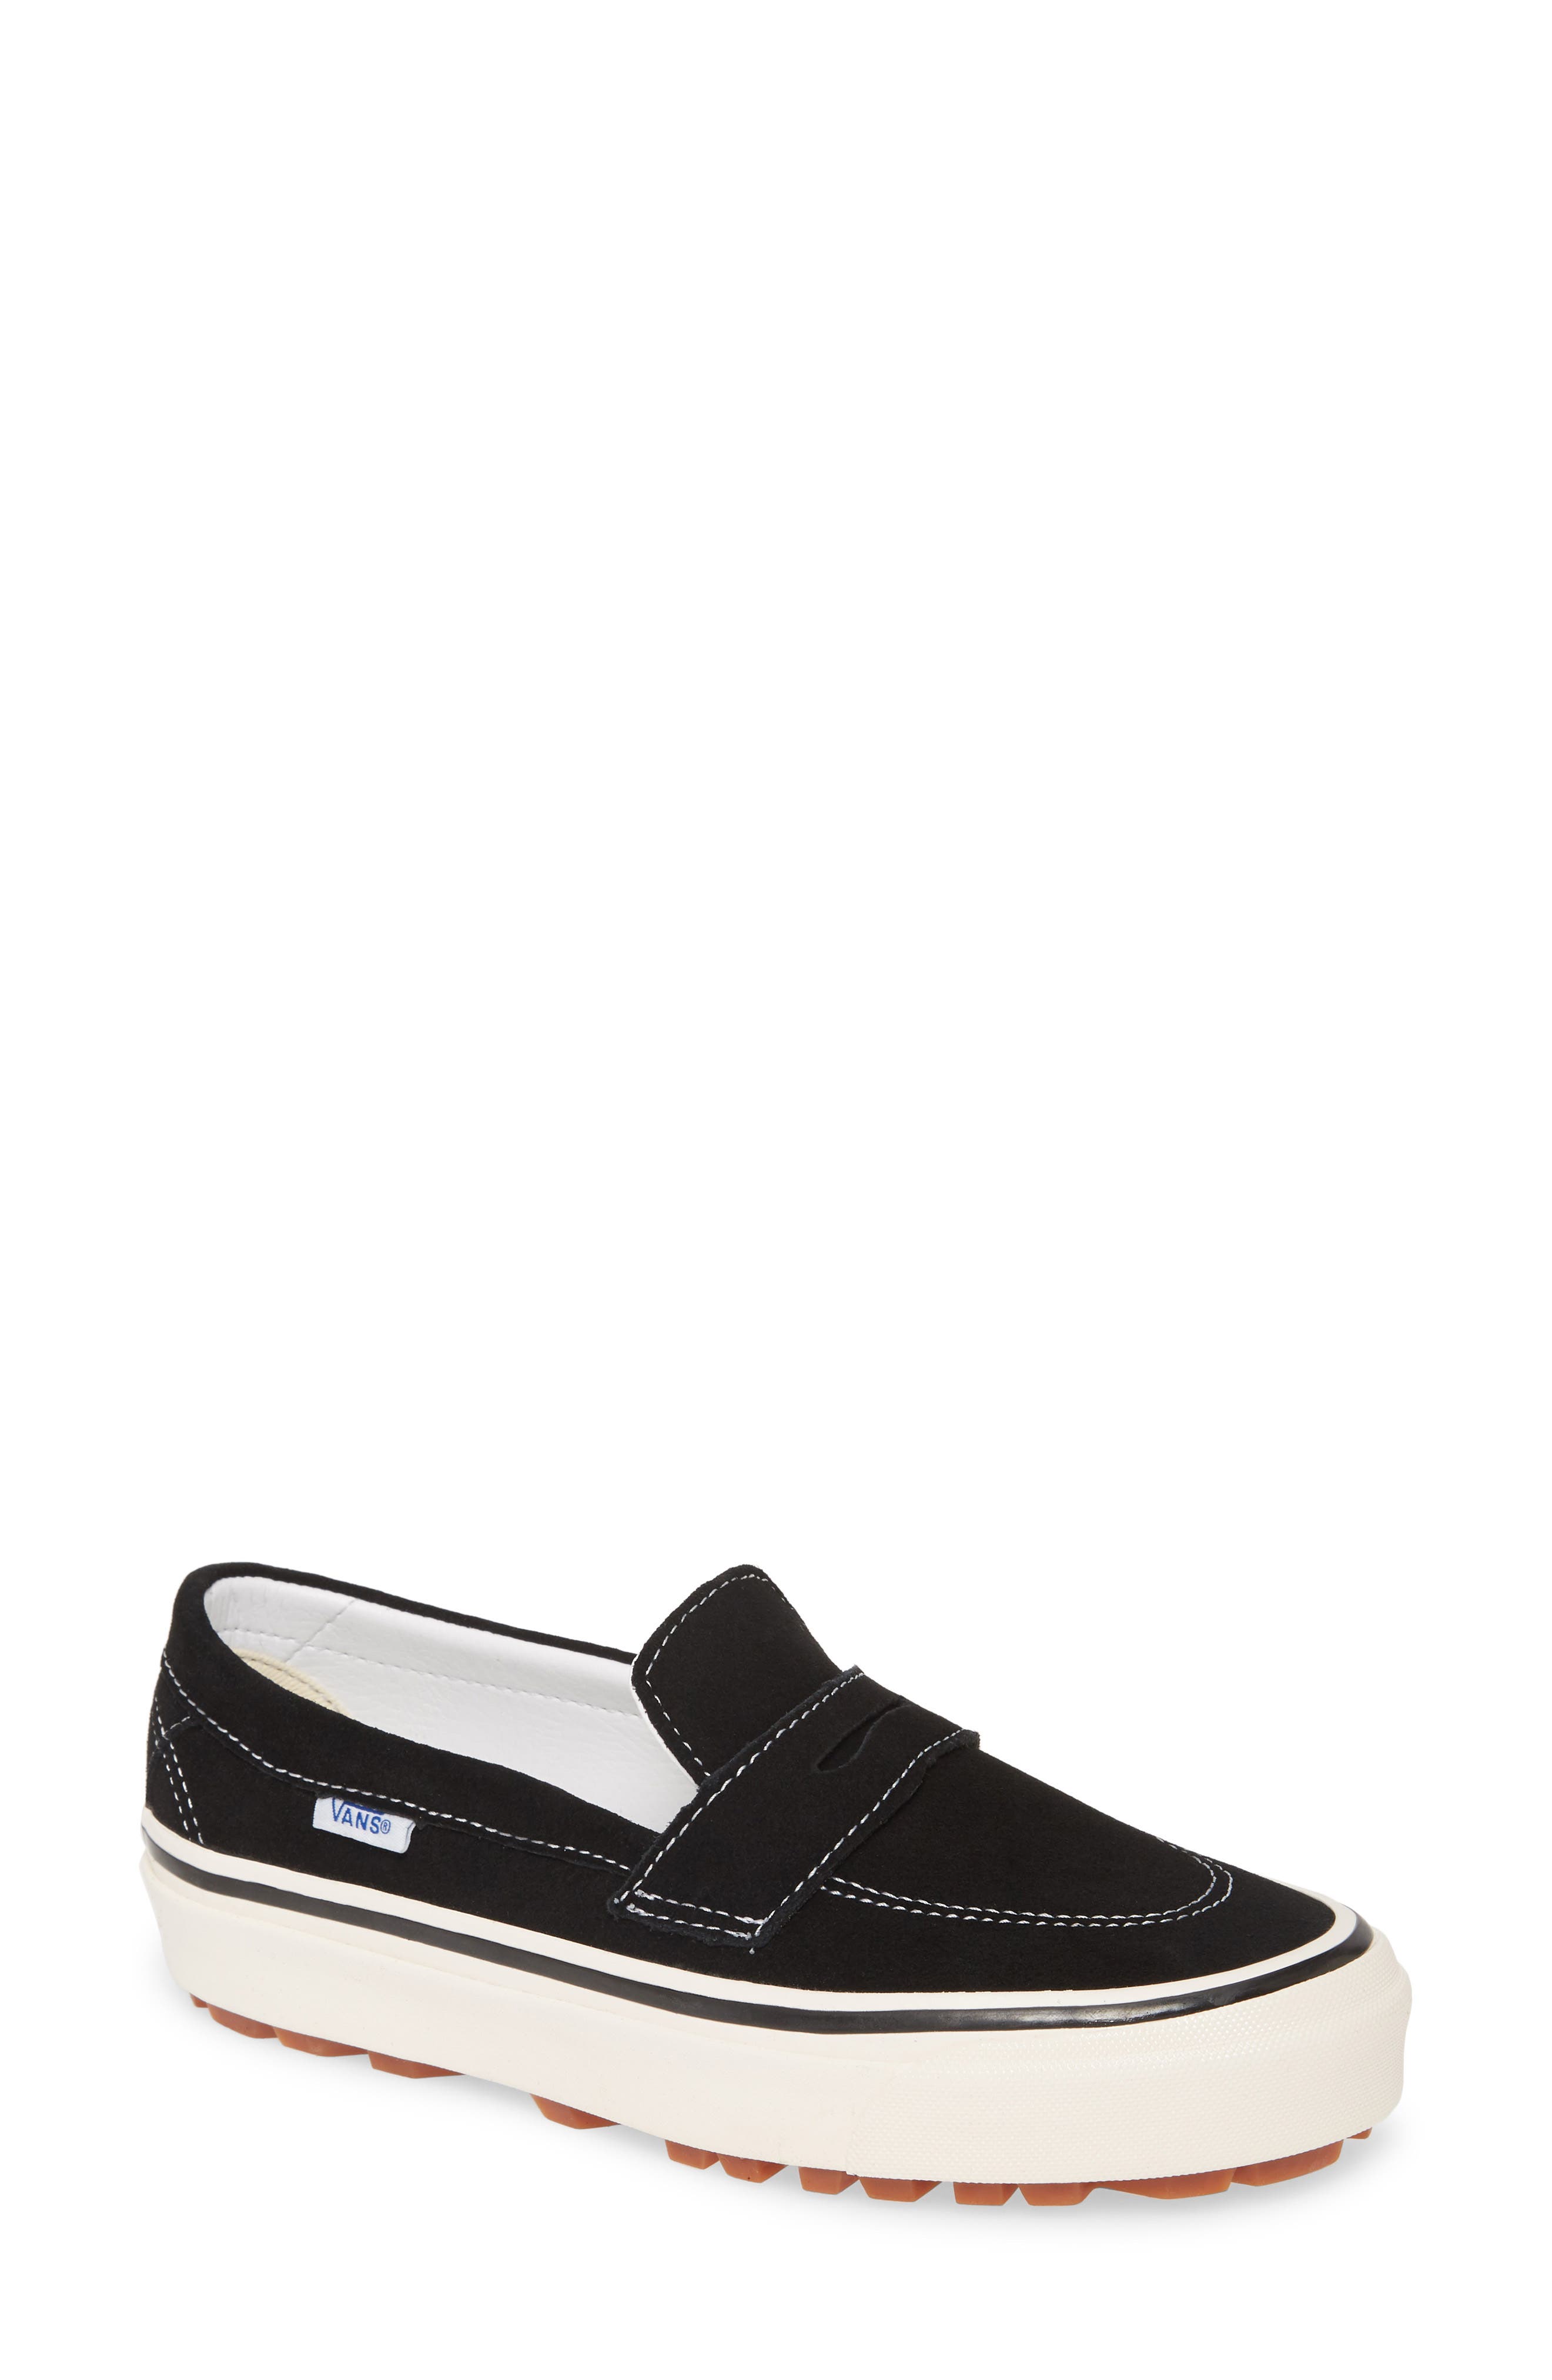 Vans Anaheim Factory Style 53 Loafer 